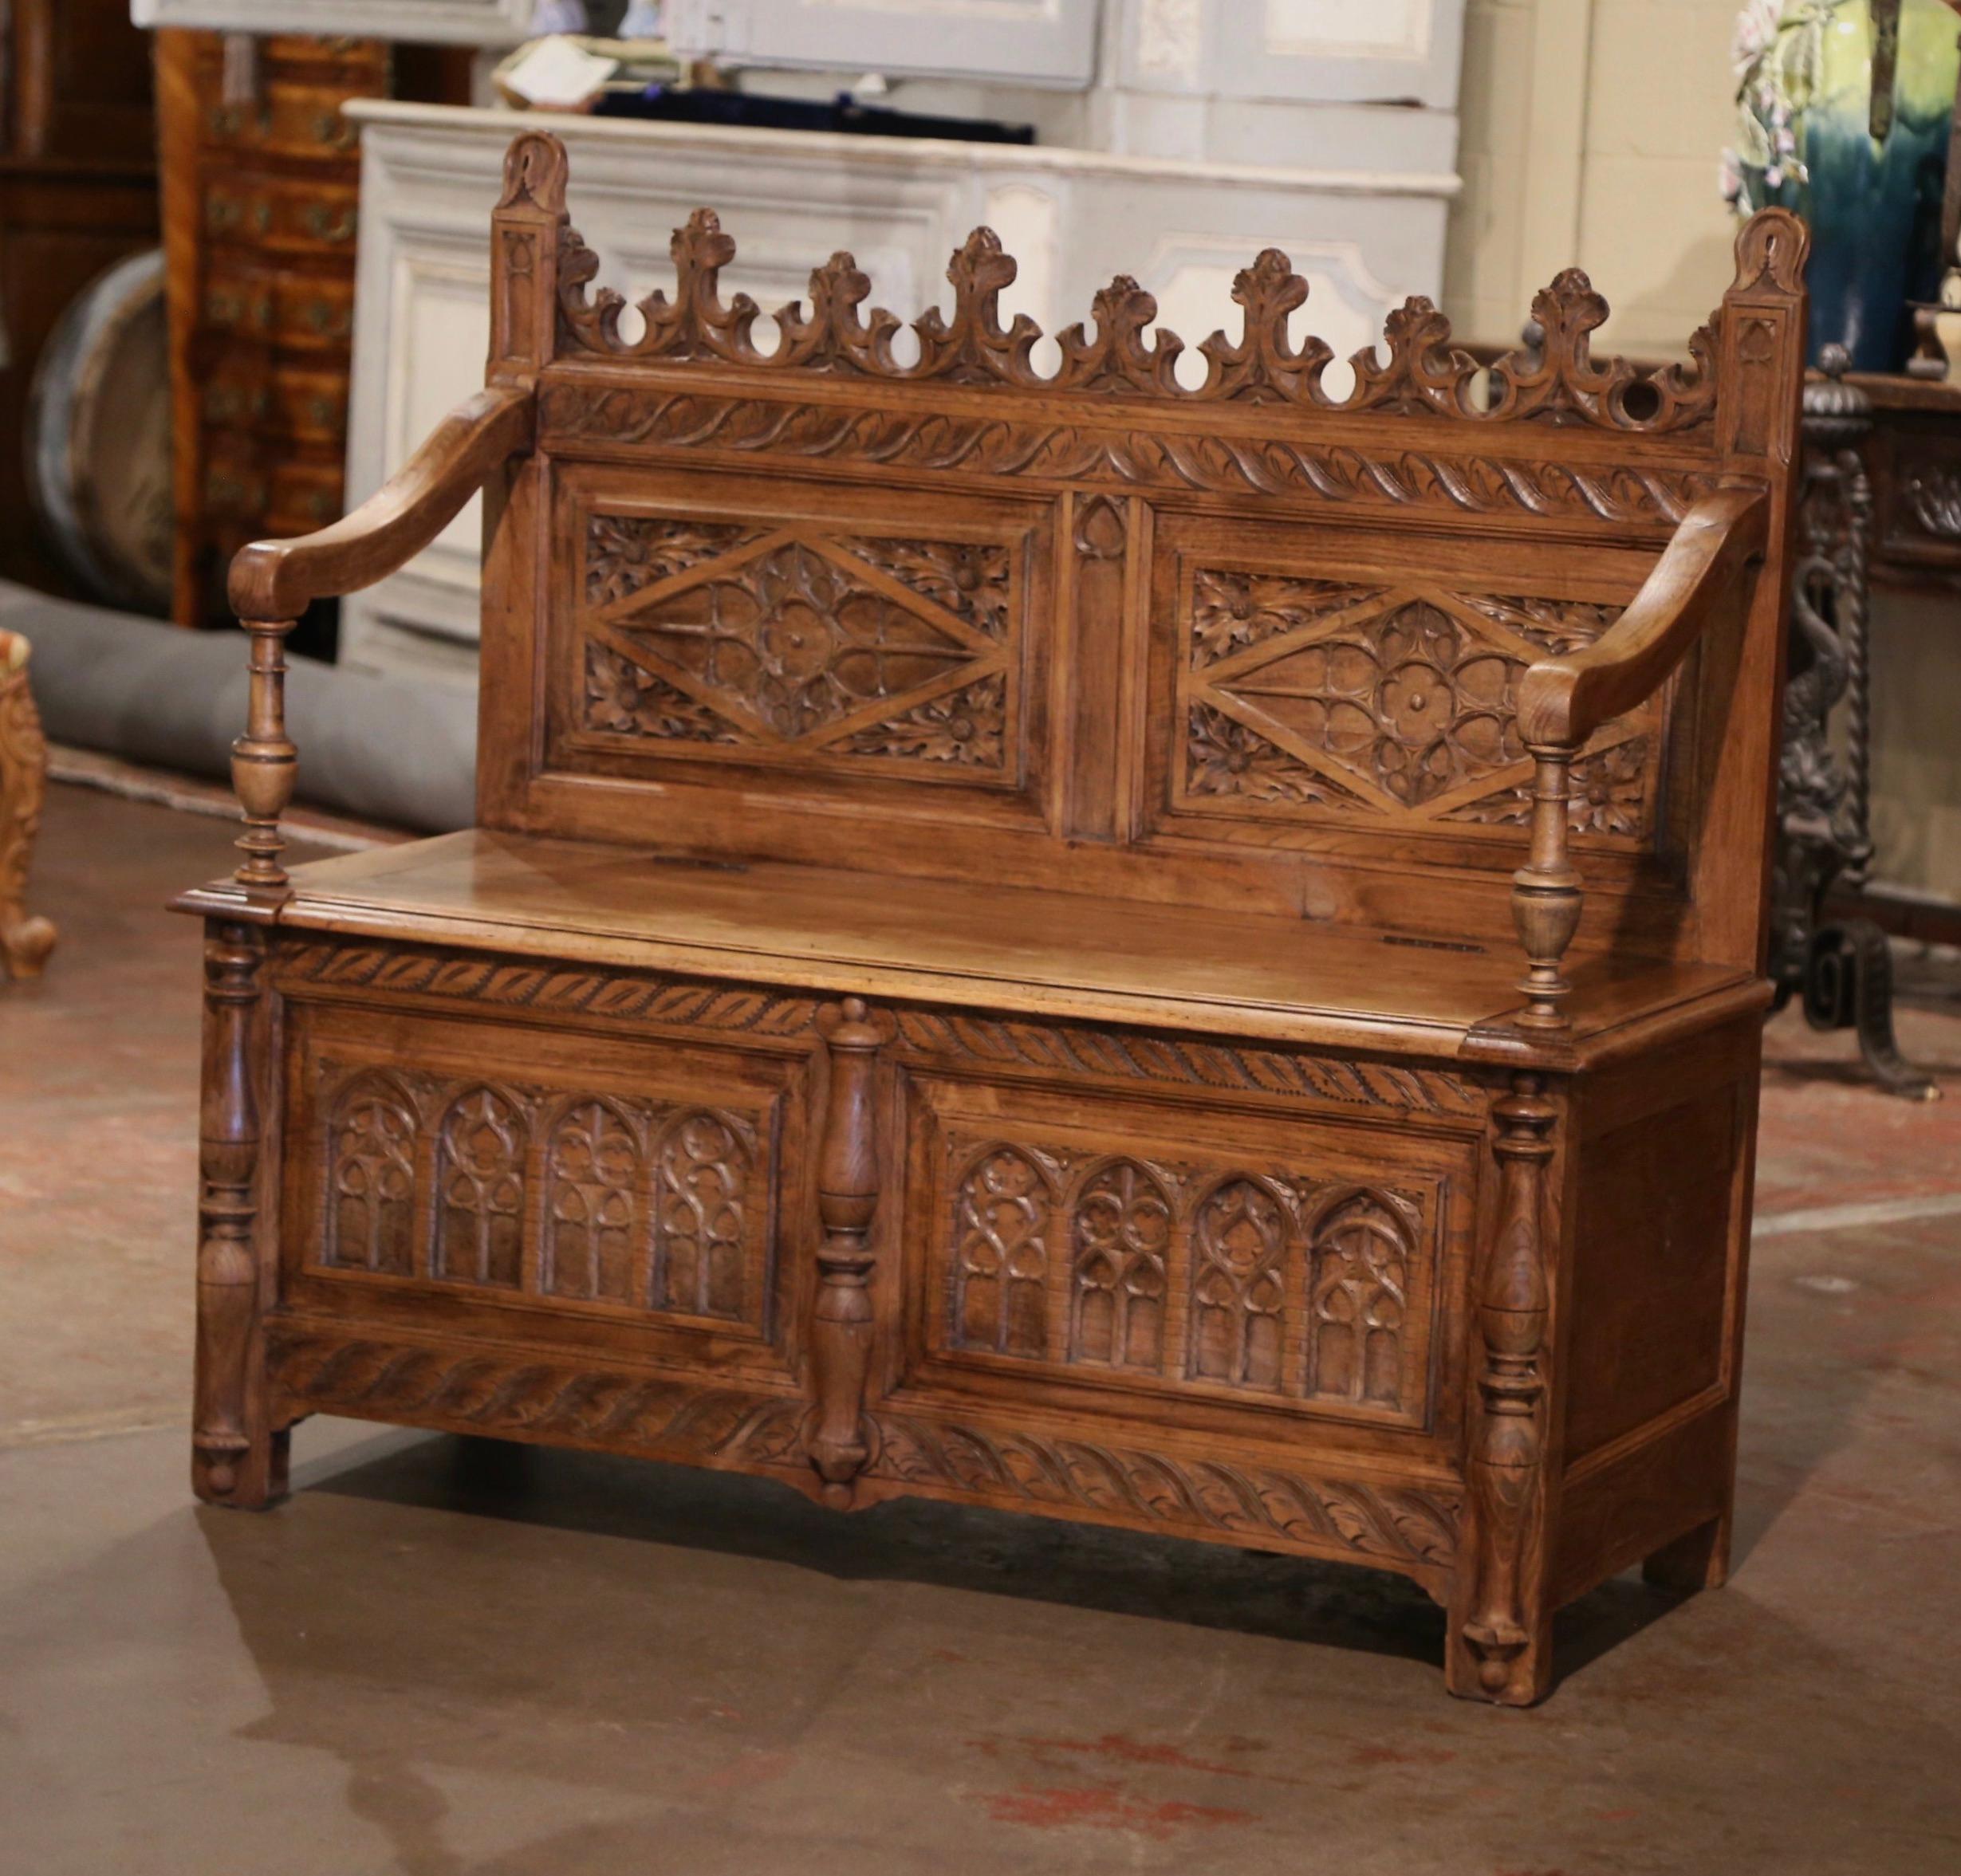 Compliment your entryway, hallway or mud room with this heavily carved antique bench. Crafted in northern France, circa 1880, and built of solid oak wood, the bleached Renaissance style bench stands on square feet over a straight carved apron. The